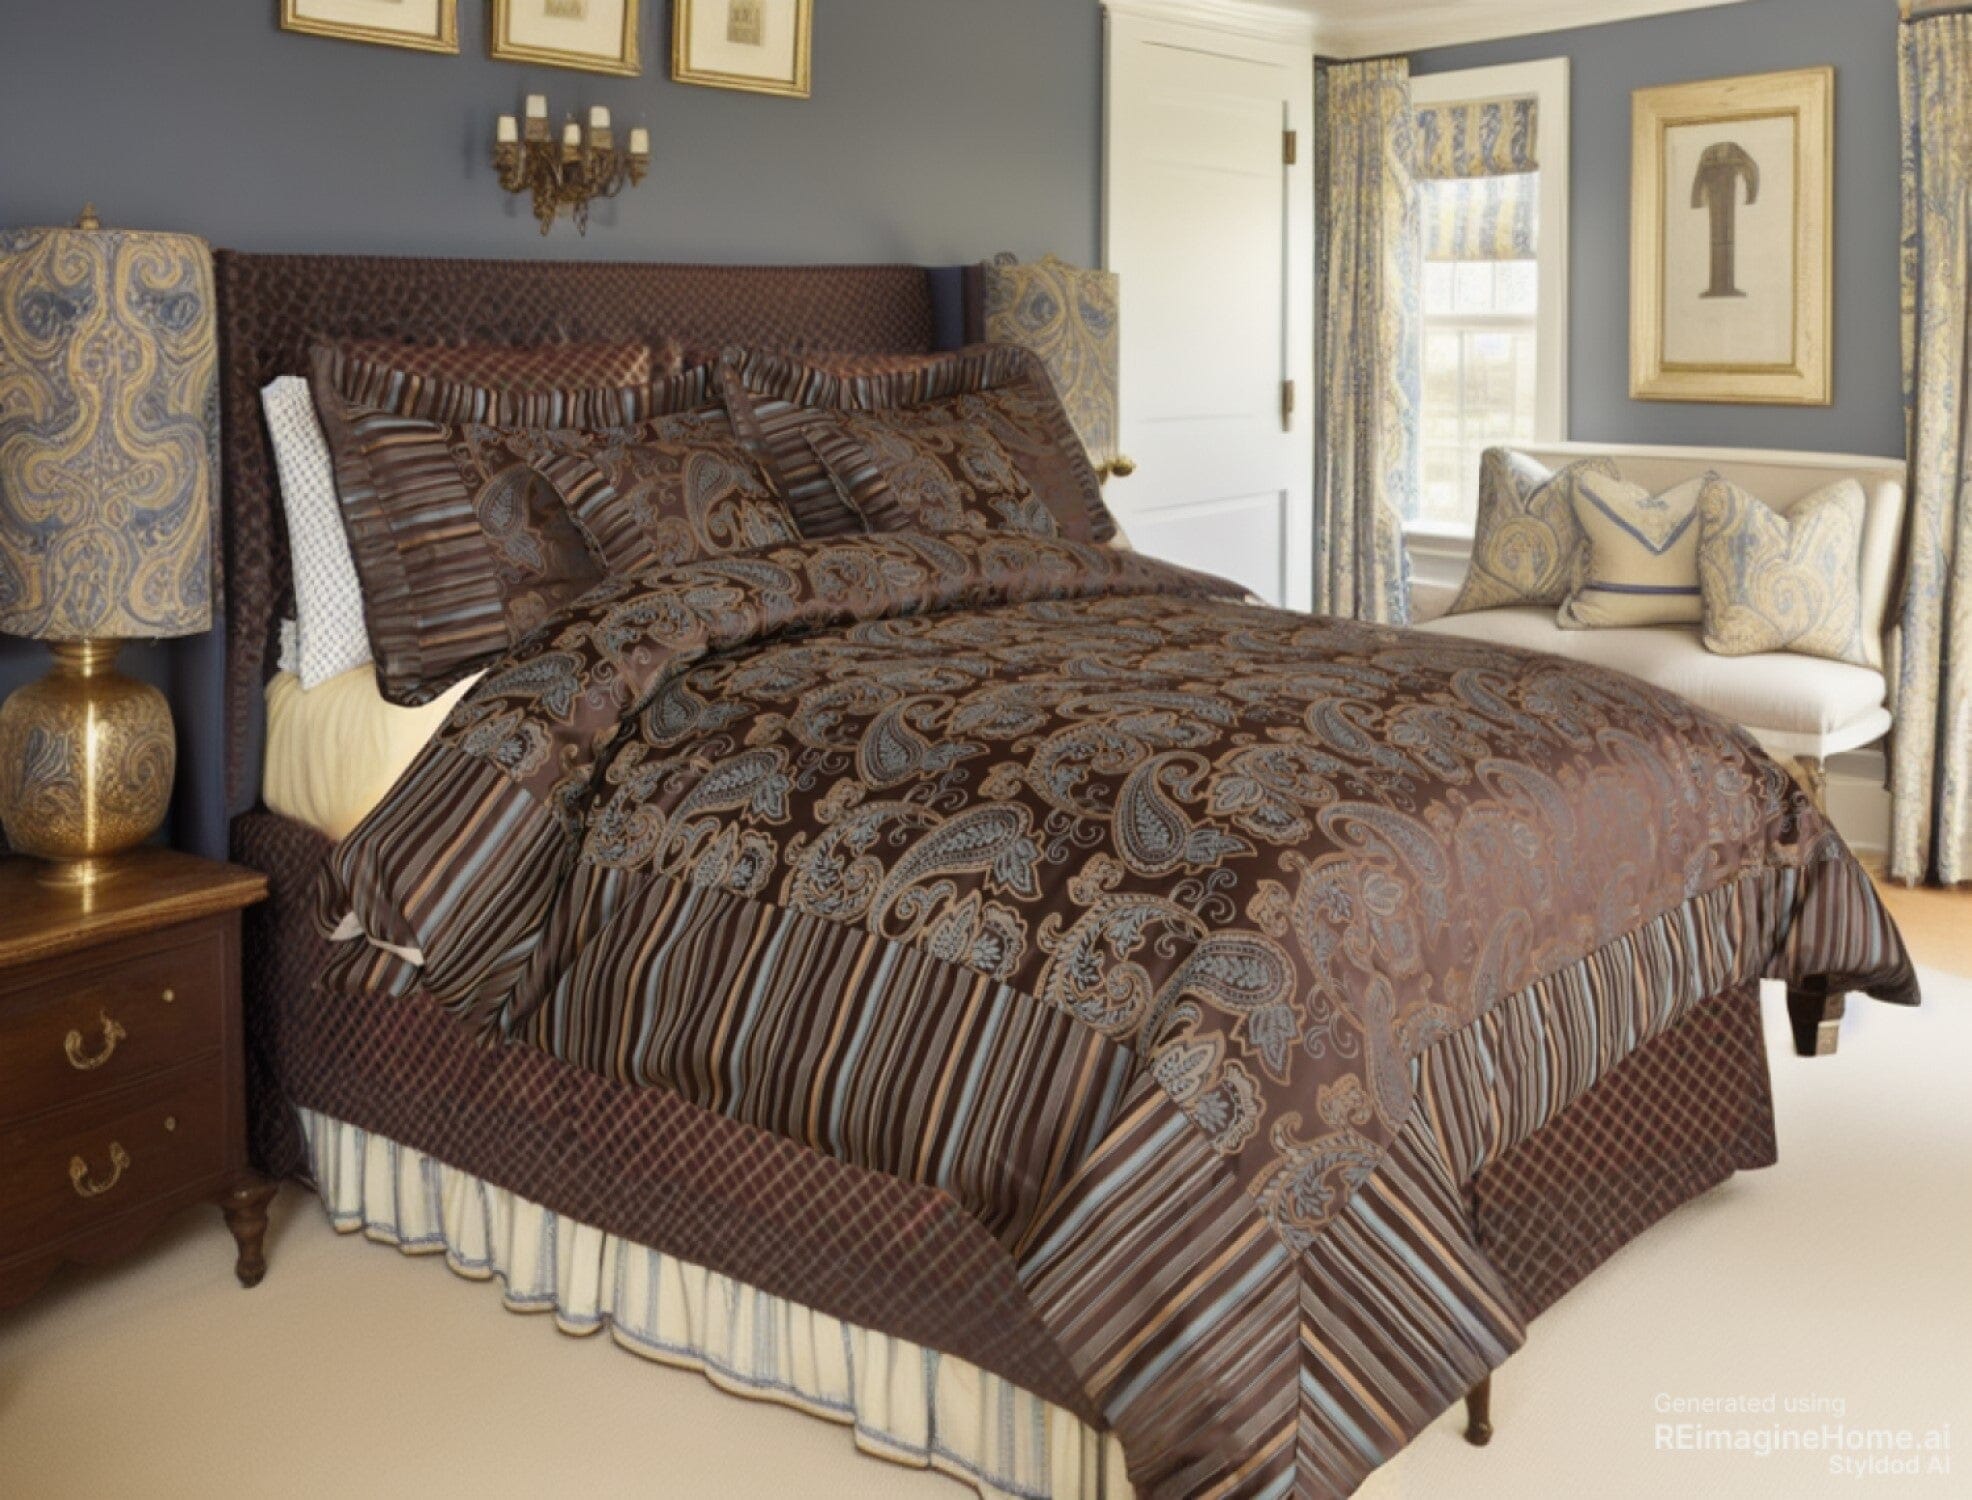 Tache Chenille Elegant Paisley Floral Striped Brown Blue Eastern Comforter Set With Zipper Cover (14070) - Tache Home Fashion